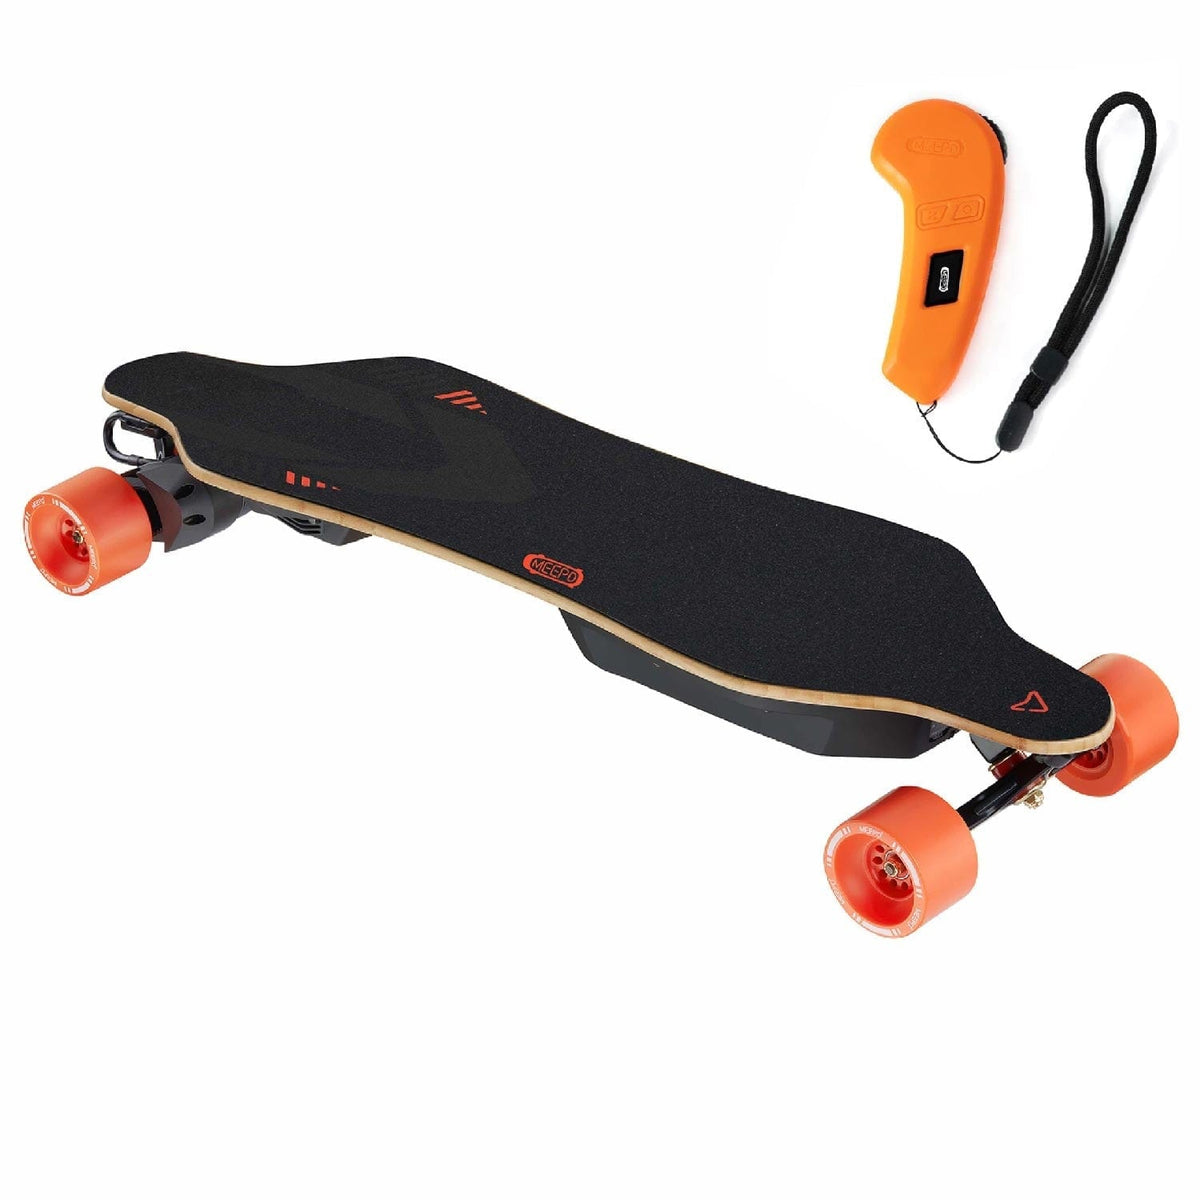 MEEPO V5 Electric Skateboard with Skateboard Rack Stand,More Convenient  Storage of Your Electric Skateboard